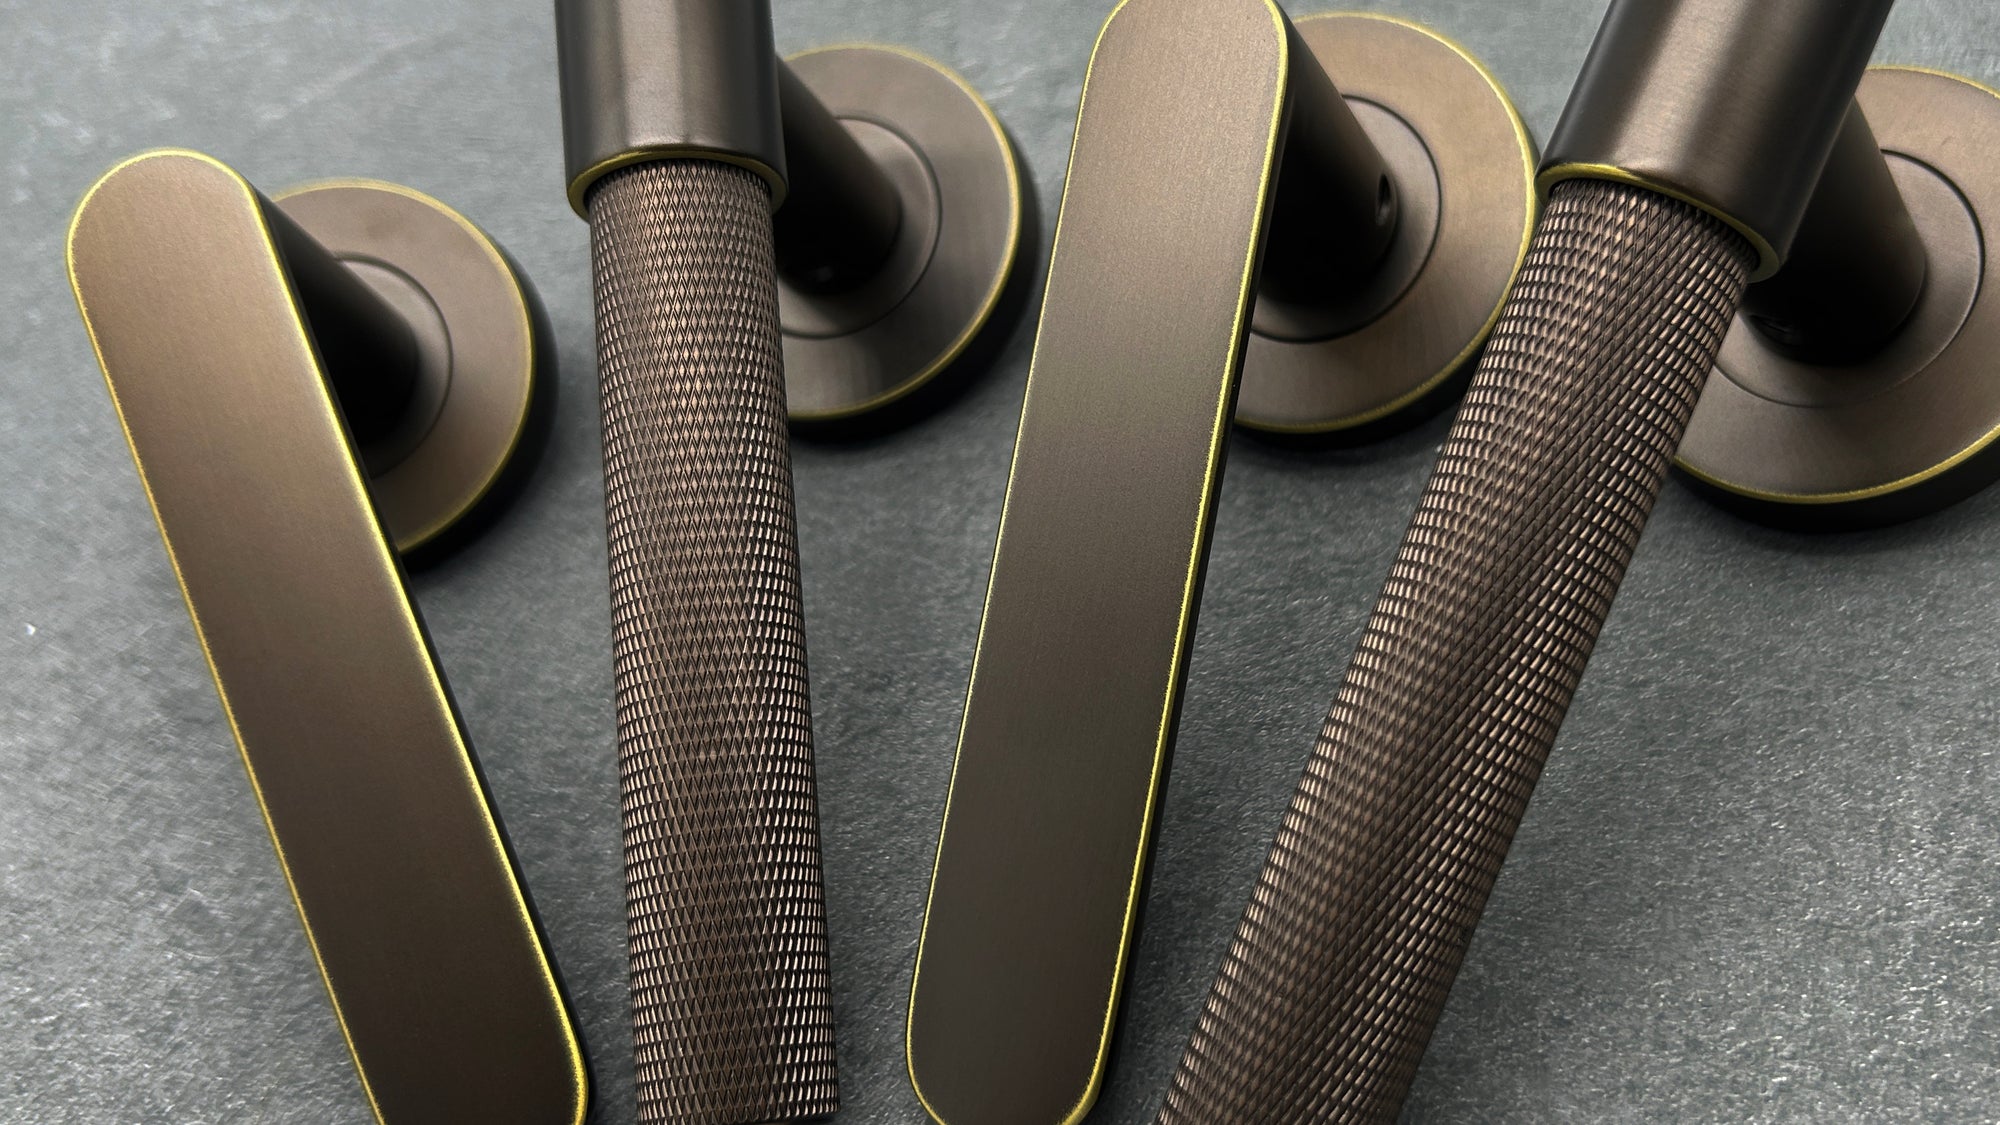 Aged Brass Door Handles: The Architect's Choice for Tactile Luxury